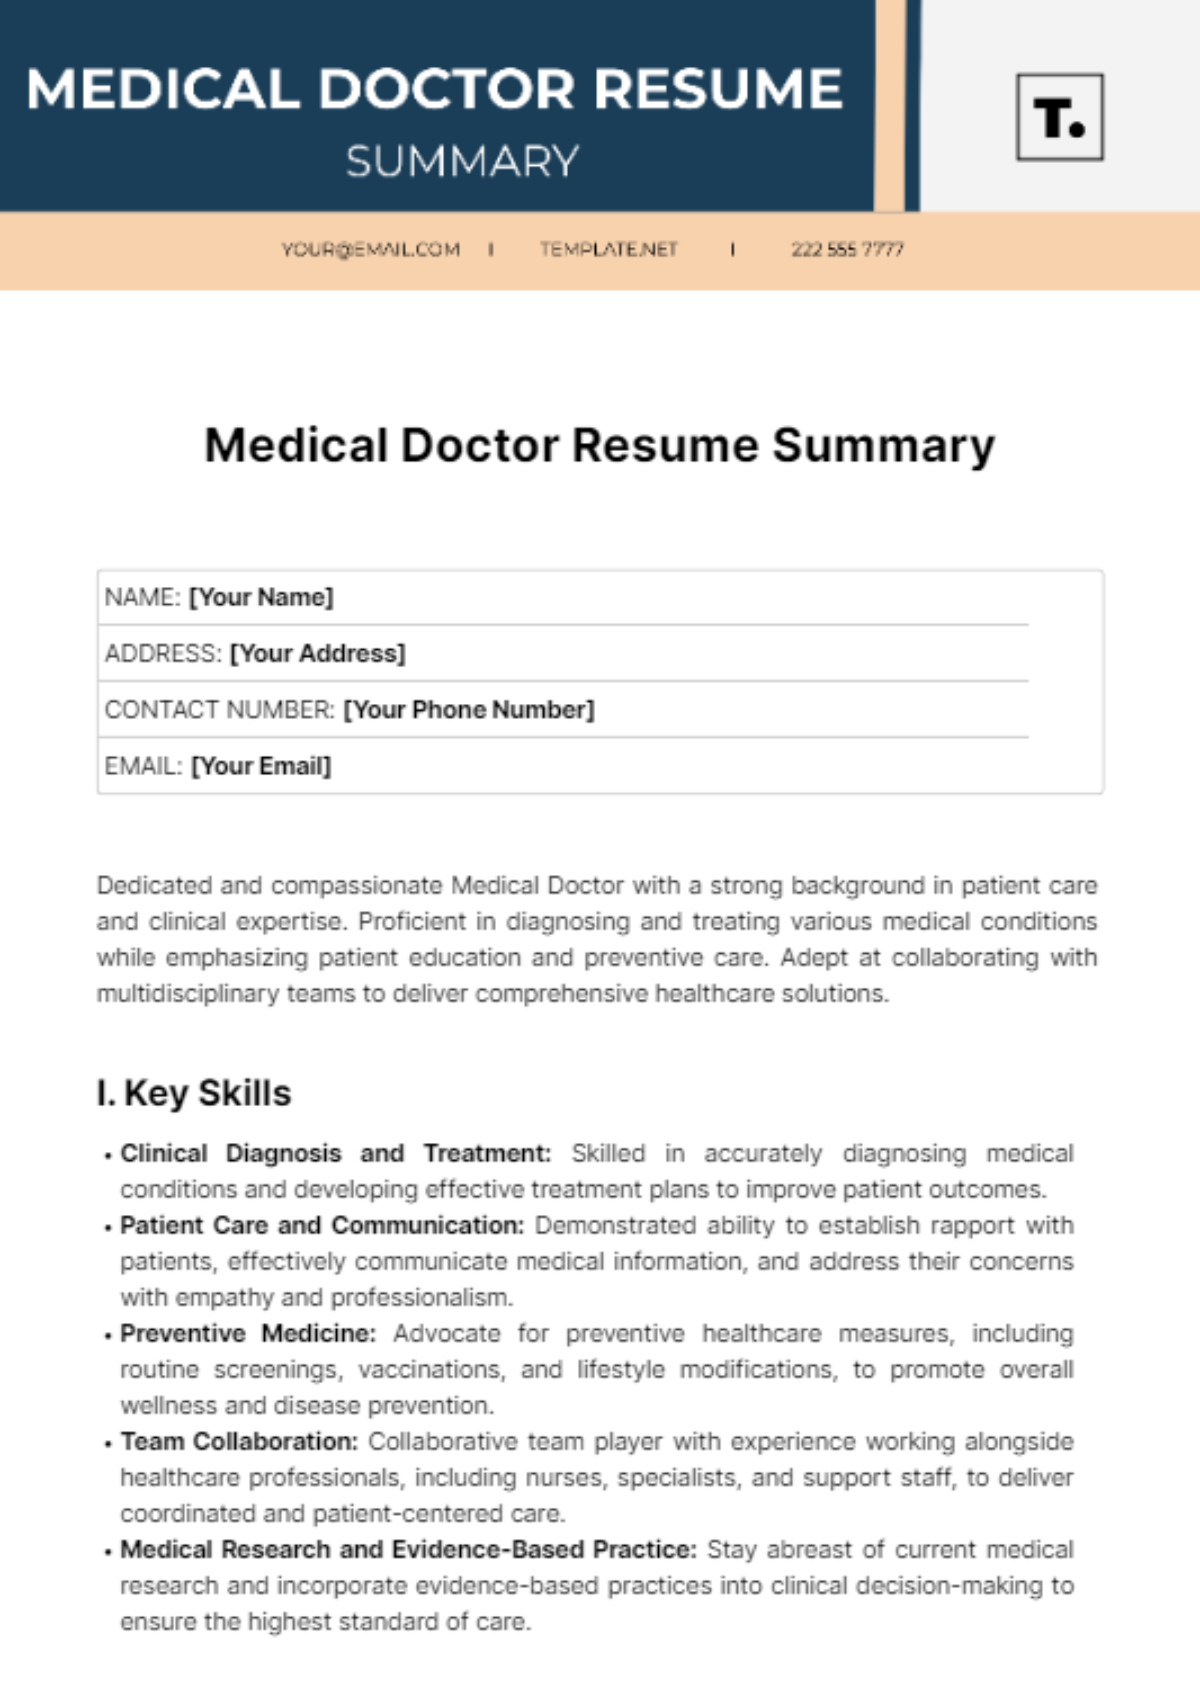 Free Medical Doctor Resume Summary Template